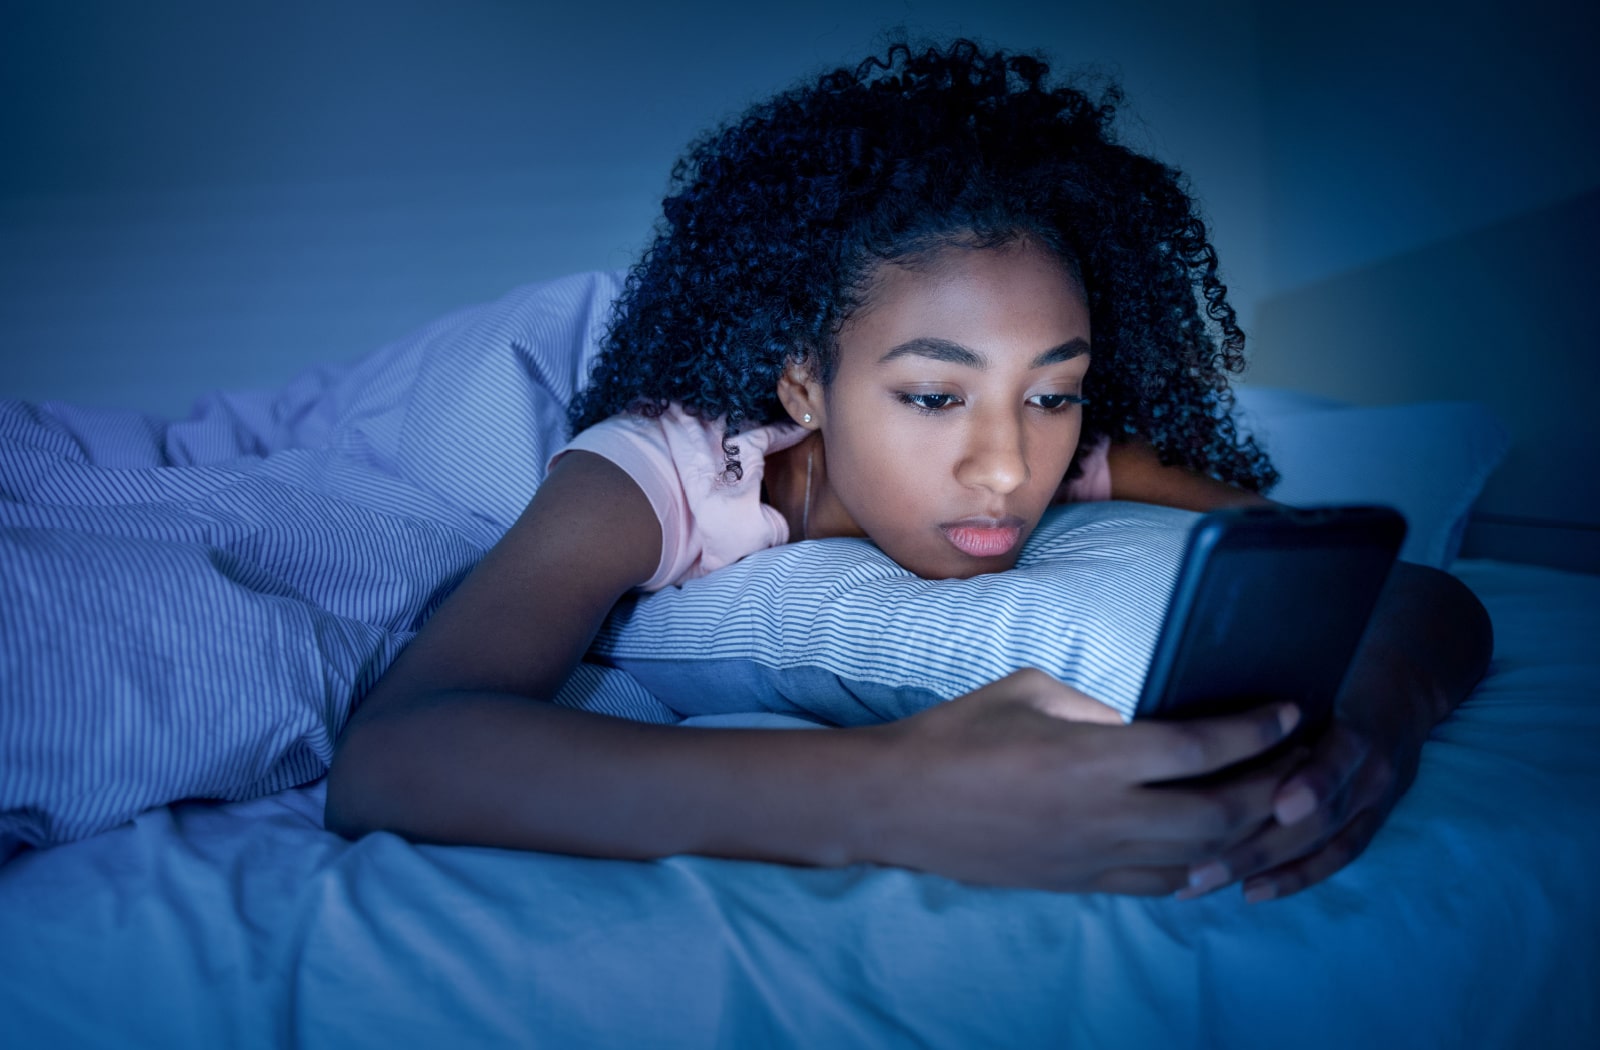 A teenage girl lies awake in bed playing on her phone because she can't sleep